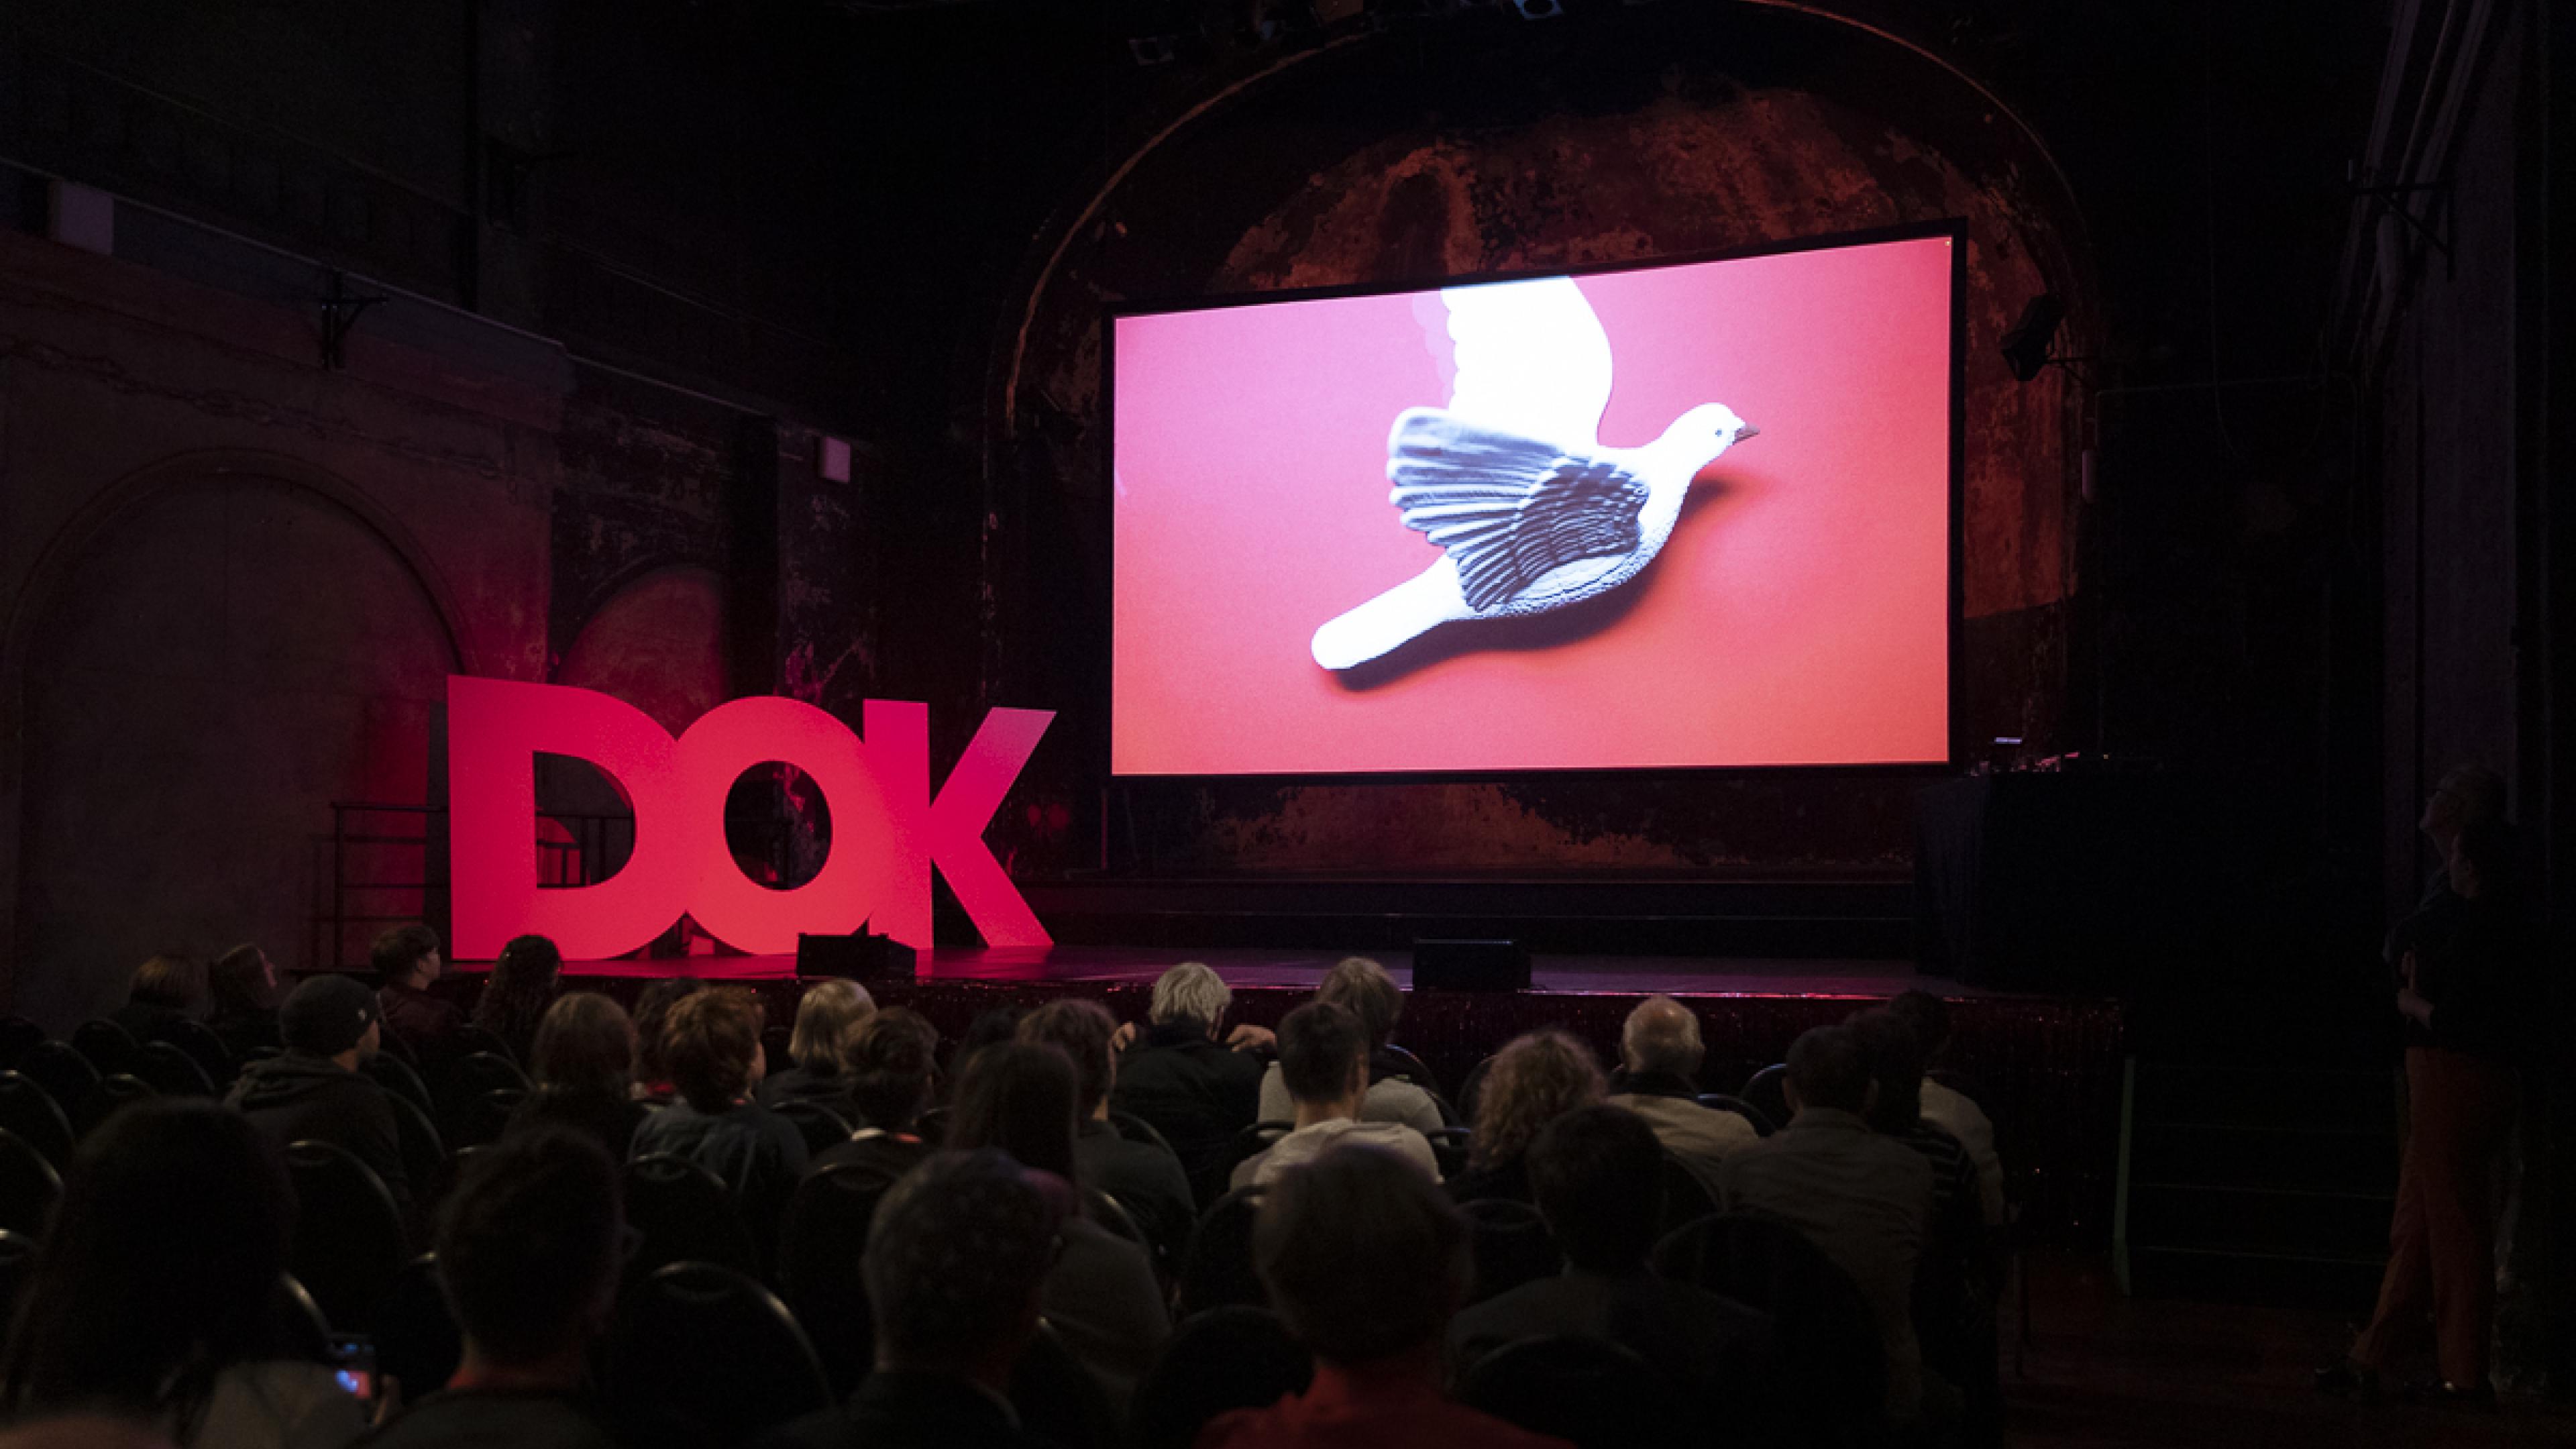 A stage in a big hall. On stage three huge letters "D-O-K" and a big screen showing a white dove. 